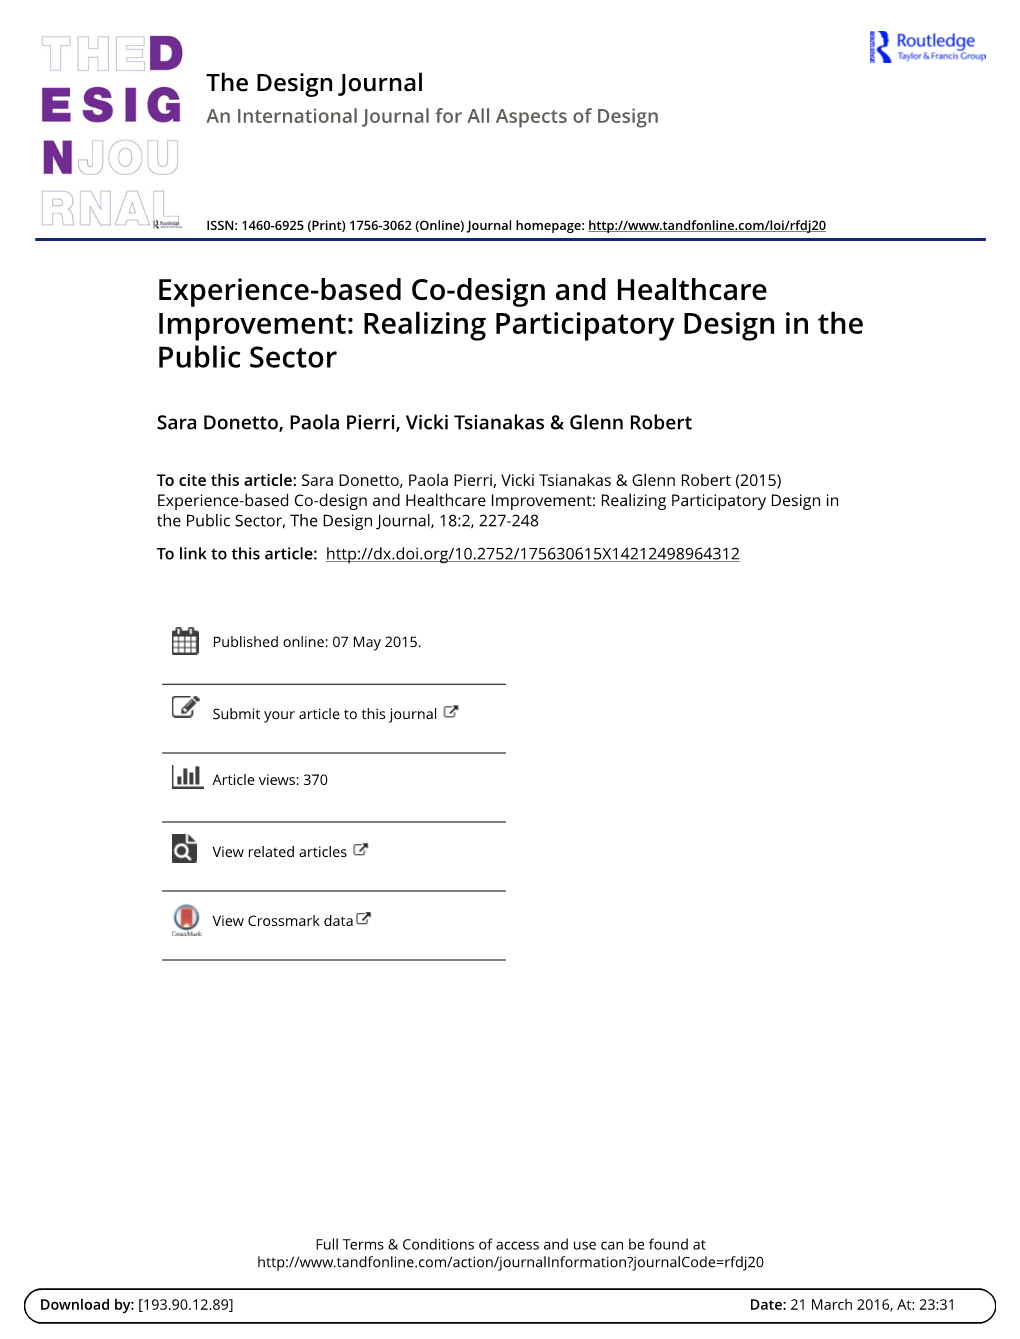 Experience-Based Co-Design and Healthcare Improvement: Realizing Participatory Design in the Public Sector